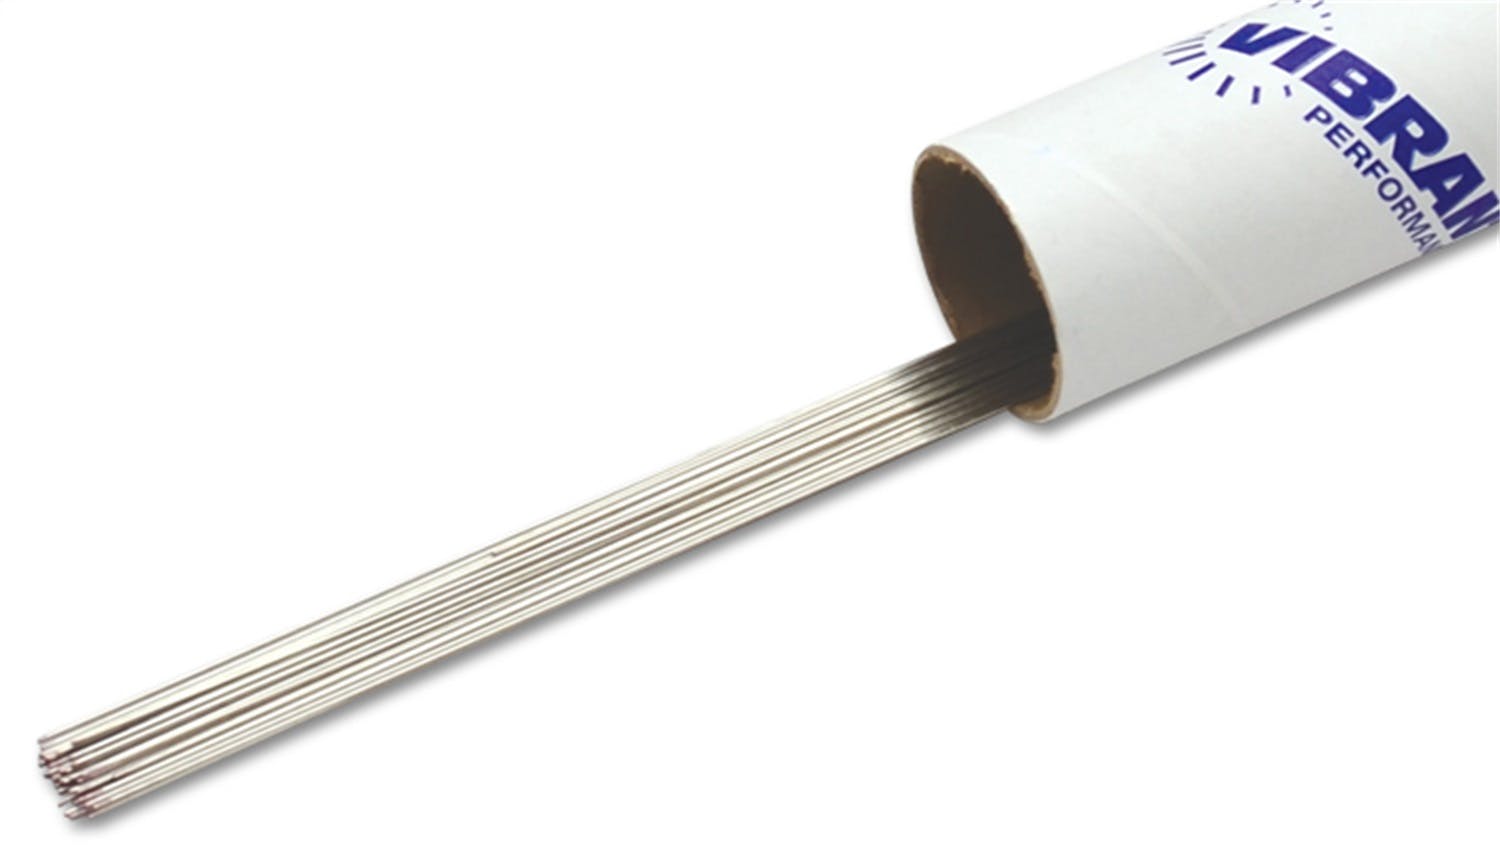 Vibrant Performance 29261 Wire Stainless Steel ER309L - 0.062 inch Thick (1.6mm) - 39.5 inch Long Rod - 1lb box